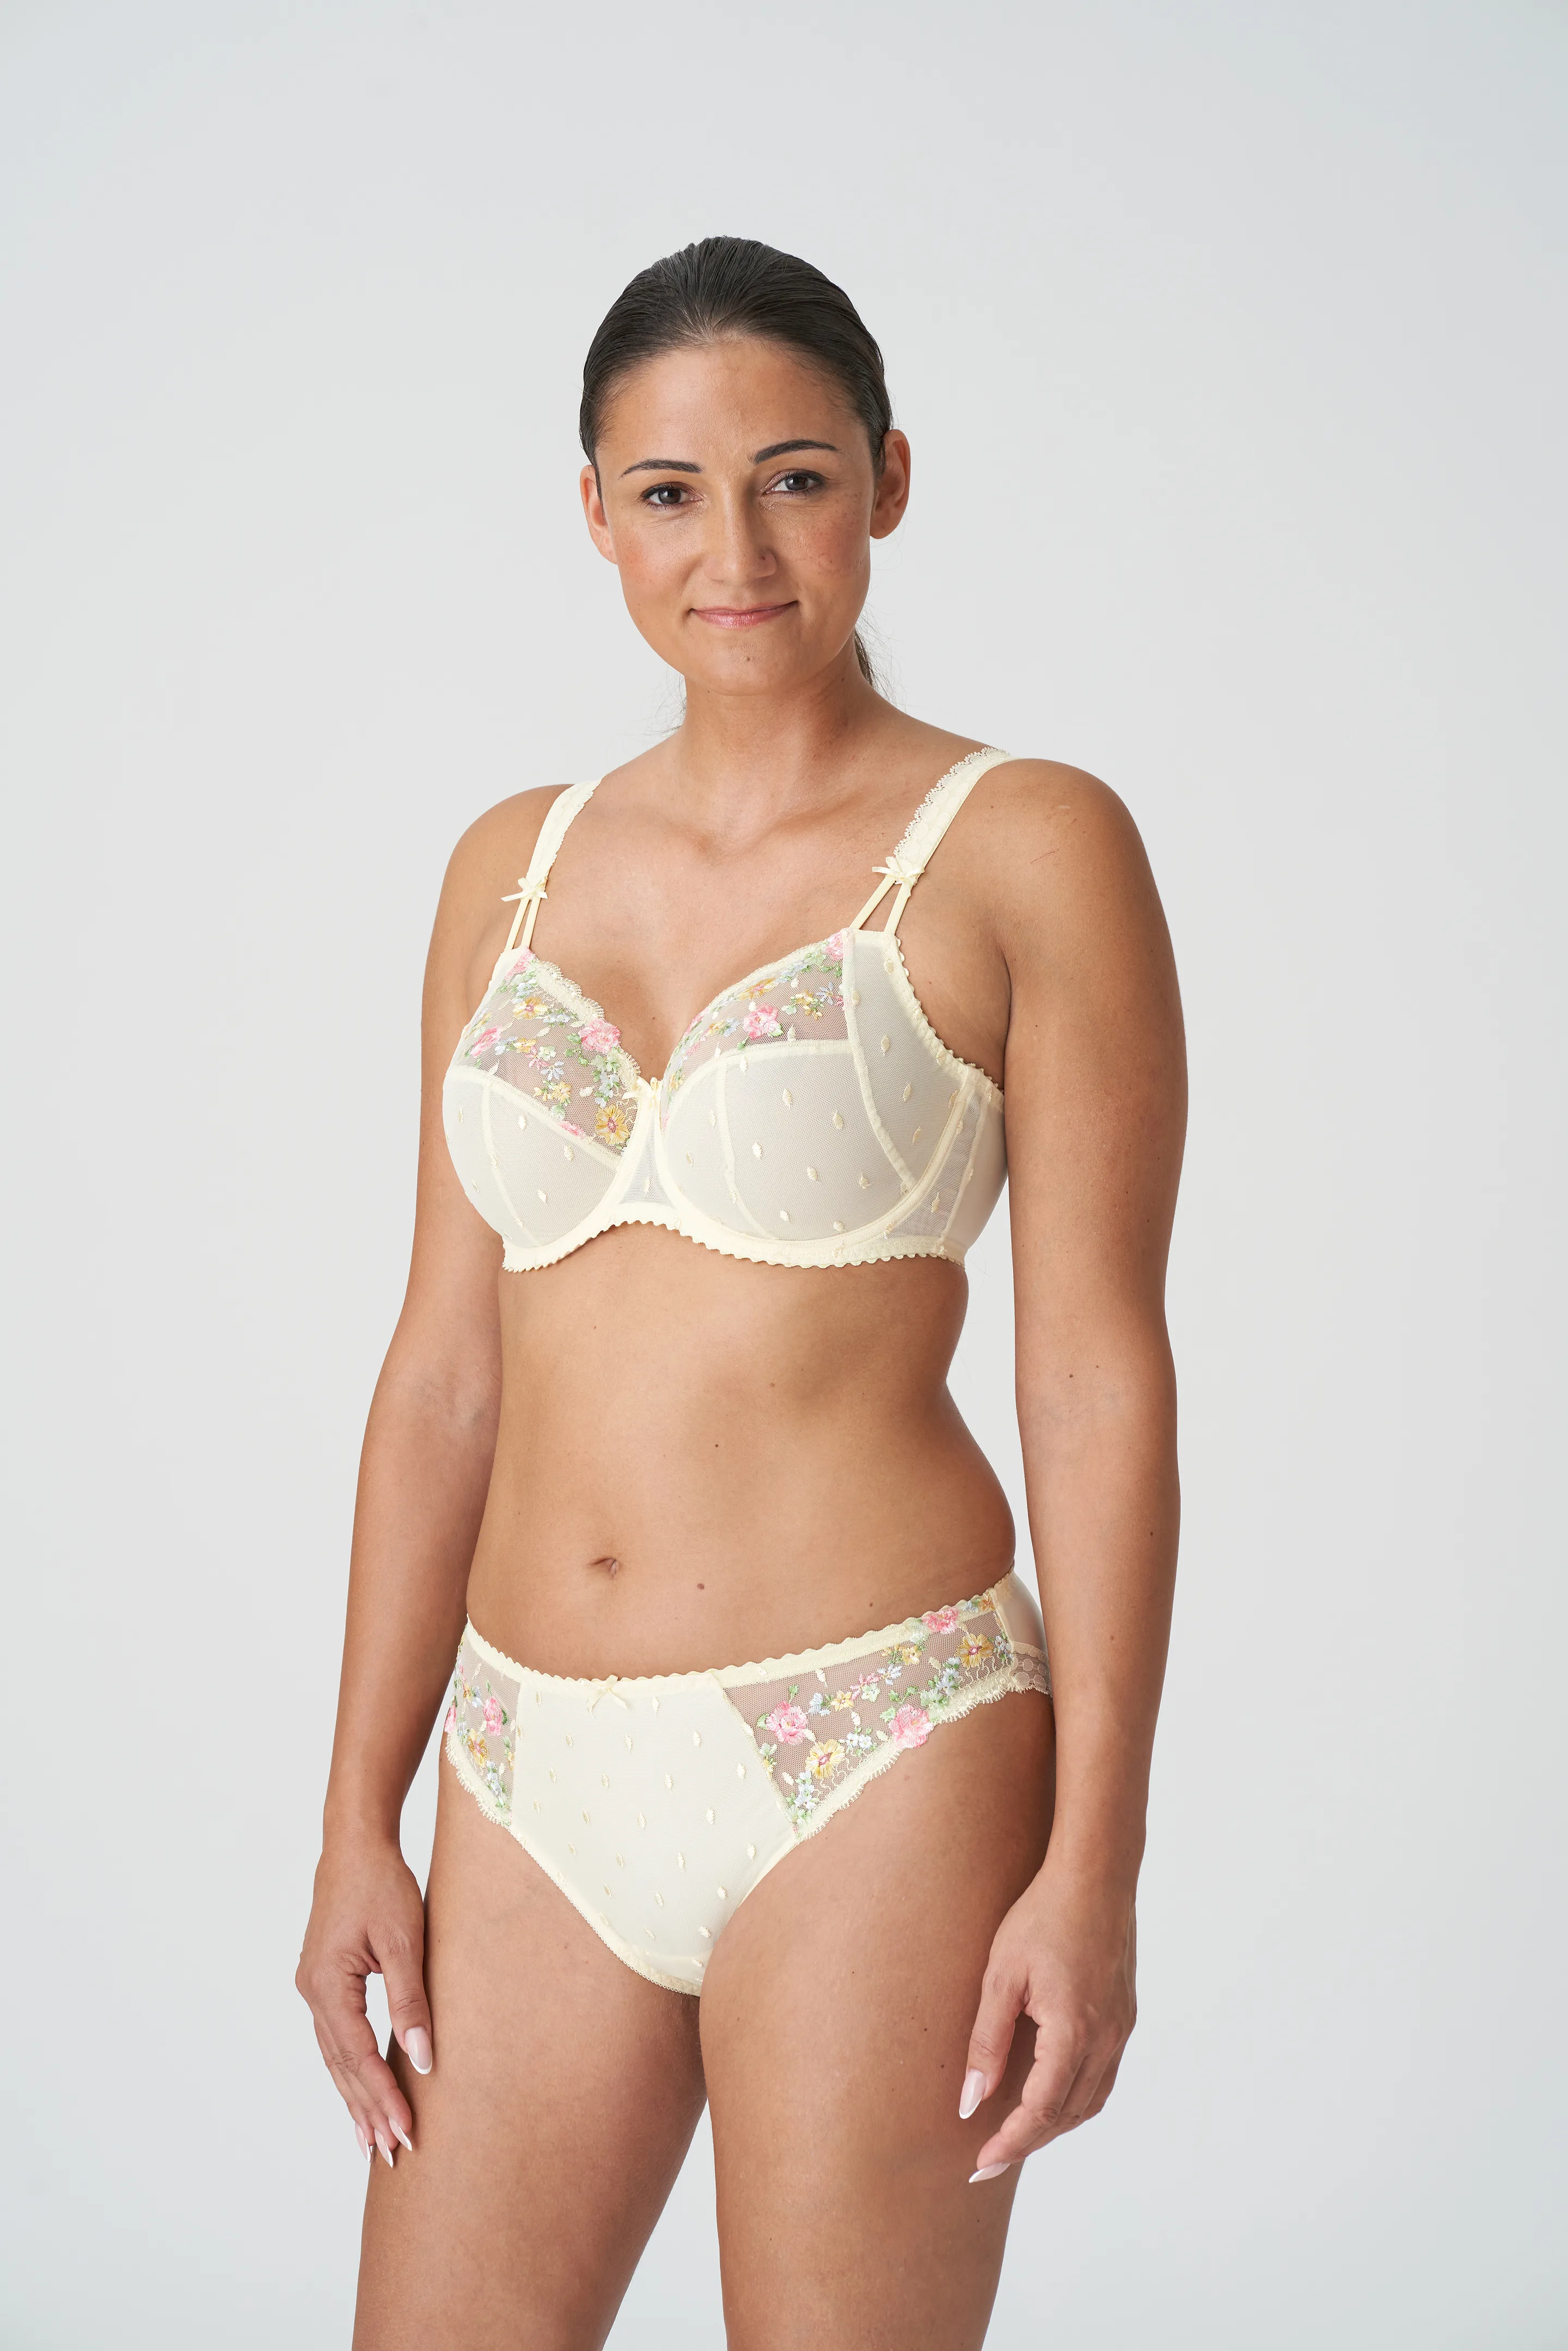 C Cup Bras in Cotton, Lace & Tulle